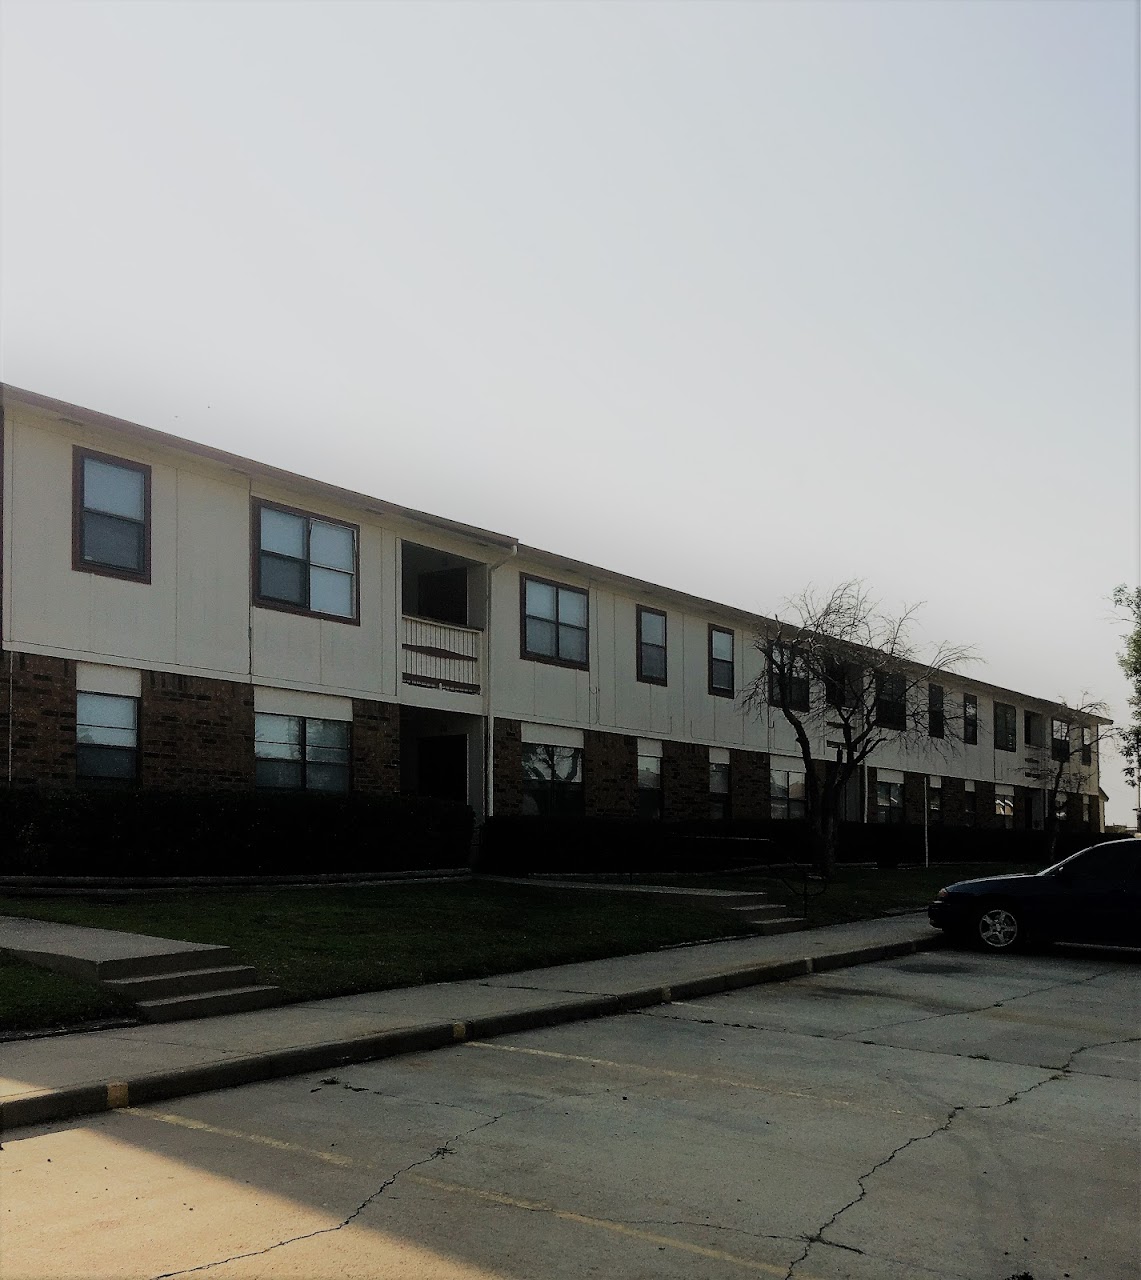 Photo of WOLF CREEK APTS. Affordable housing located at 206 N SYLVANIA ST SHATTUCK, OK 73858